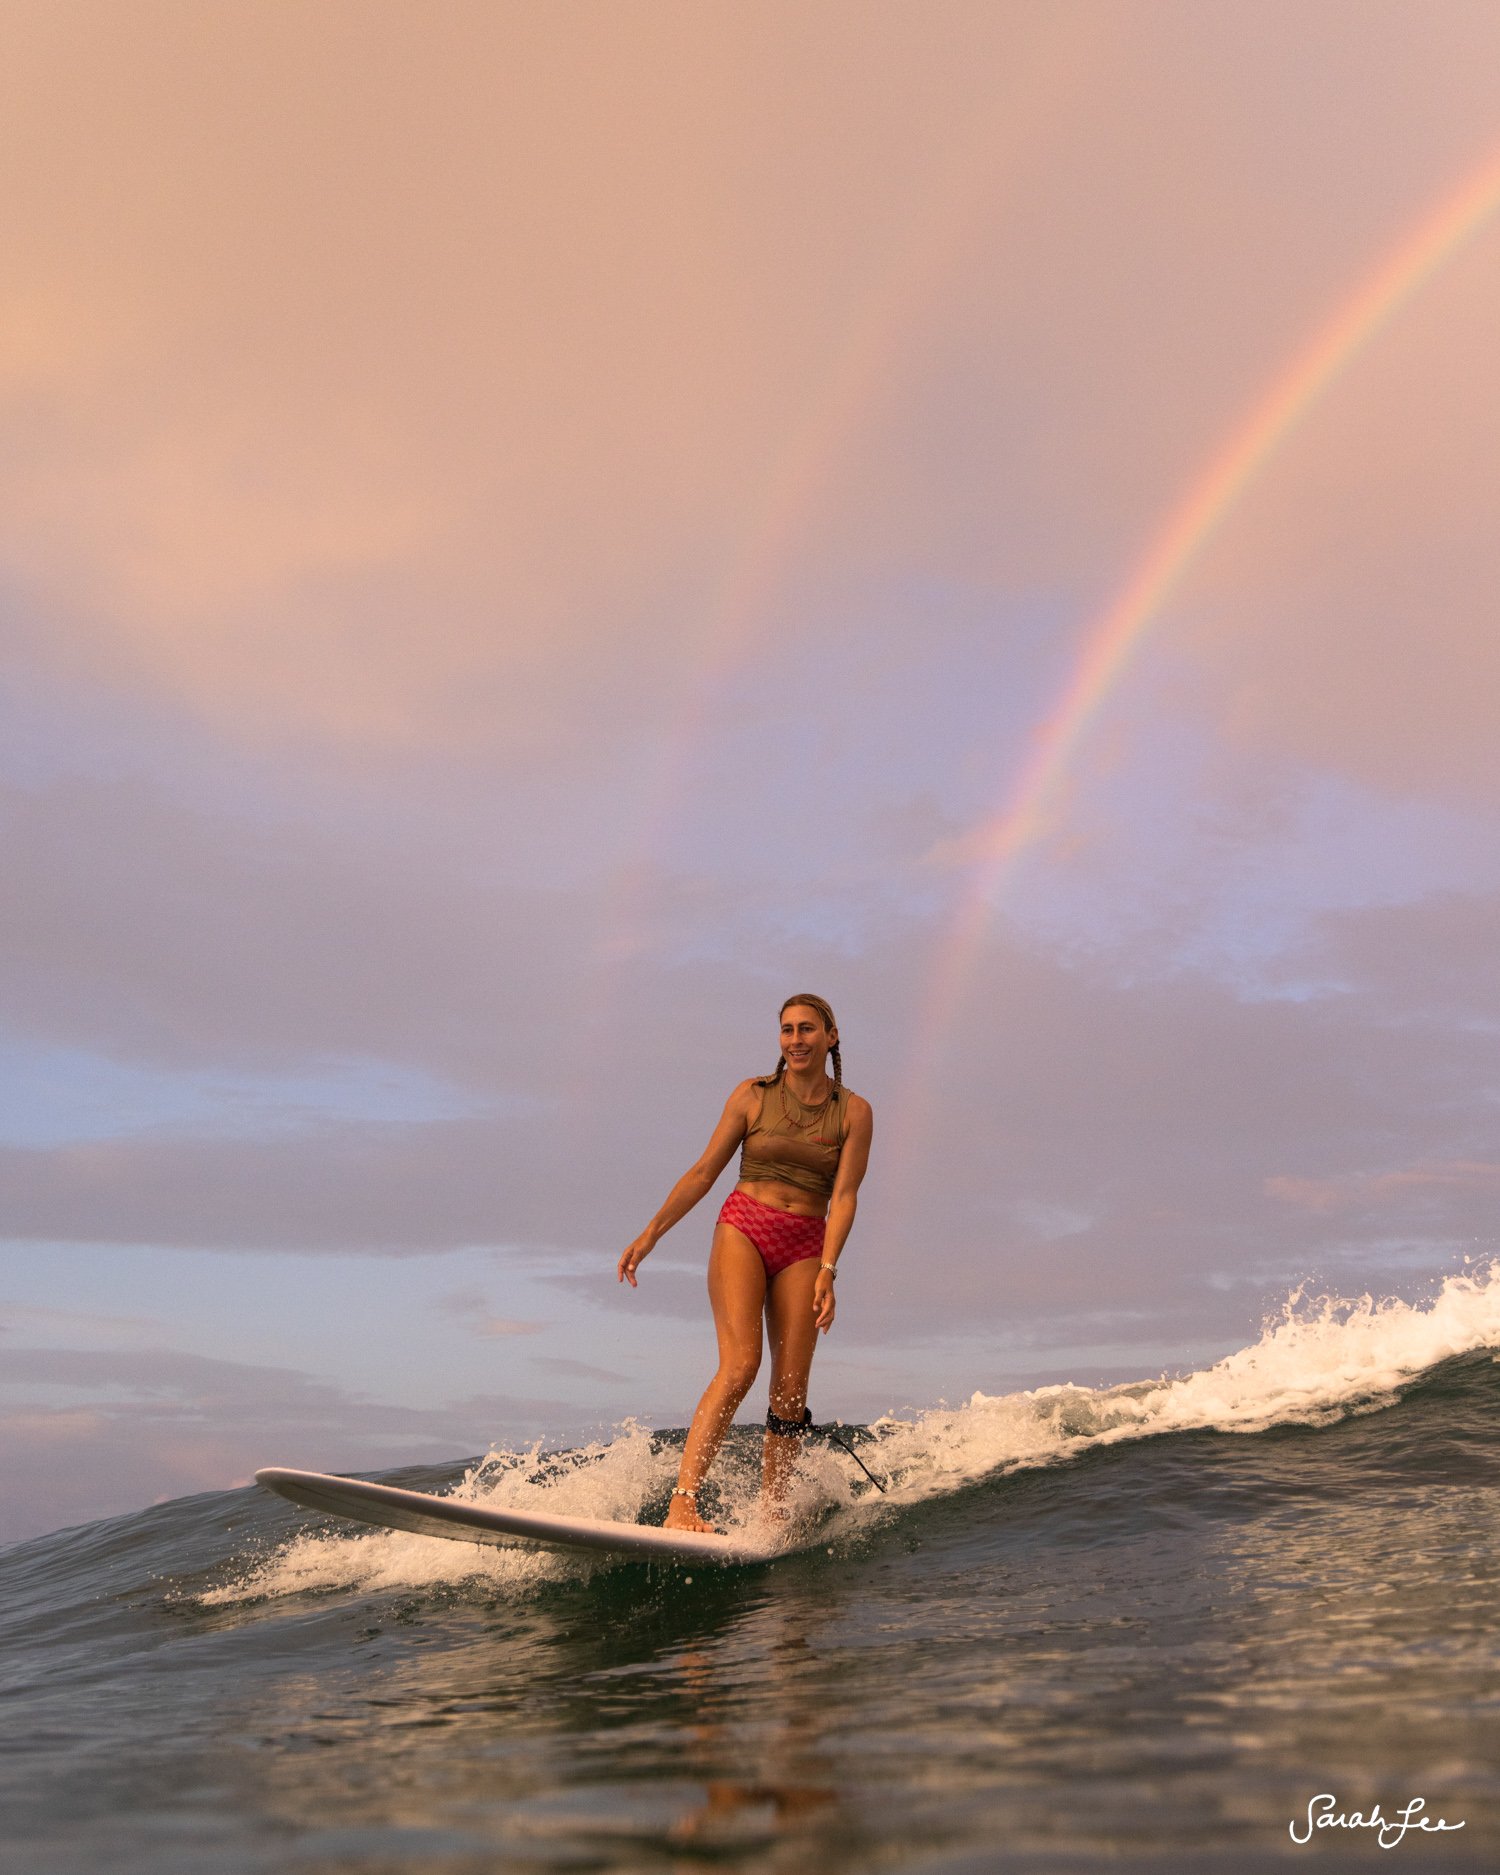 Female surfer surfing under a double rainbow